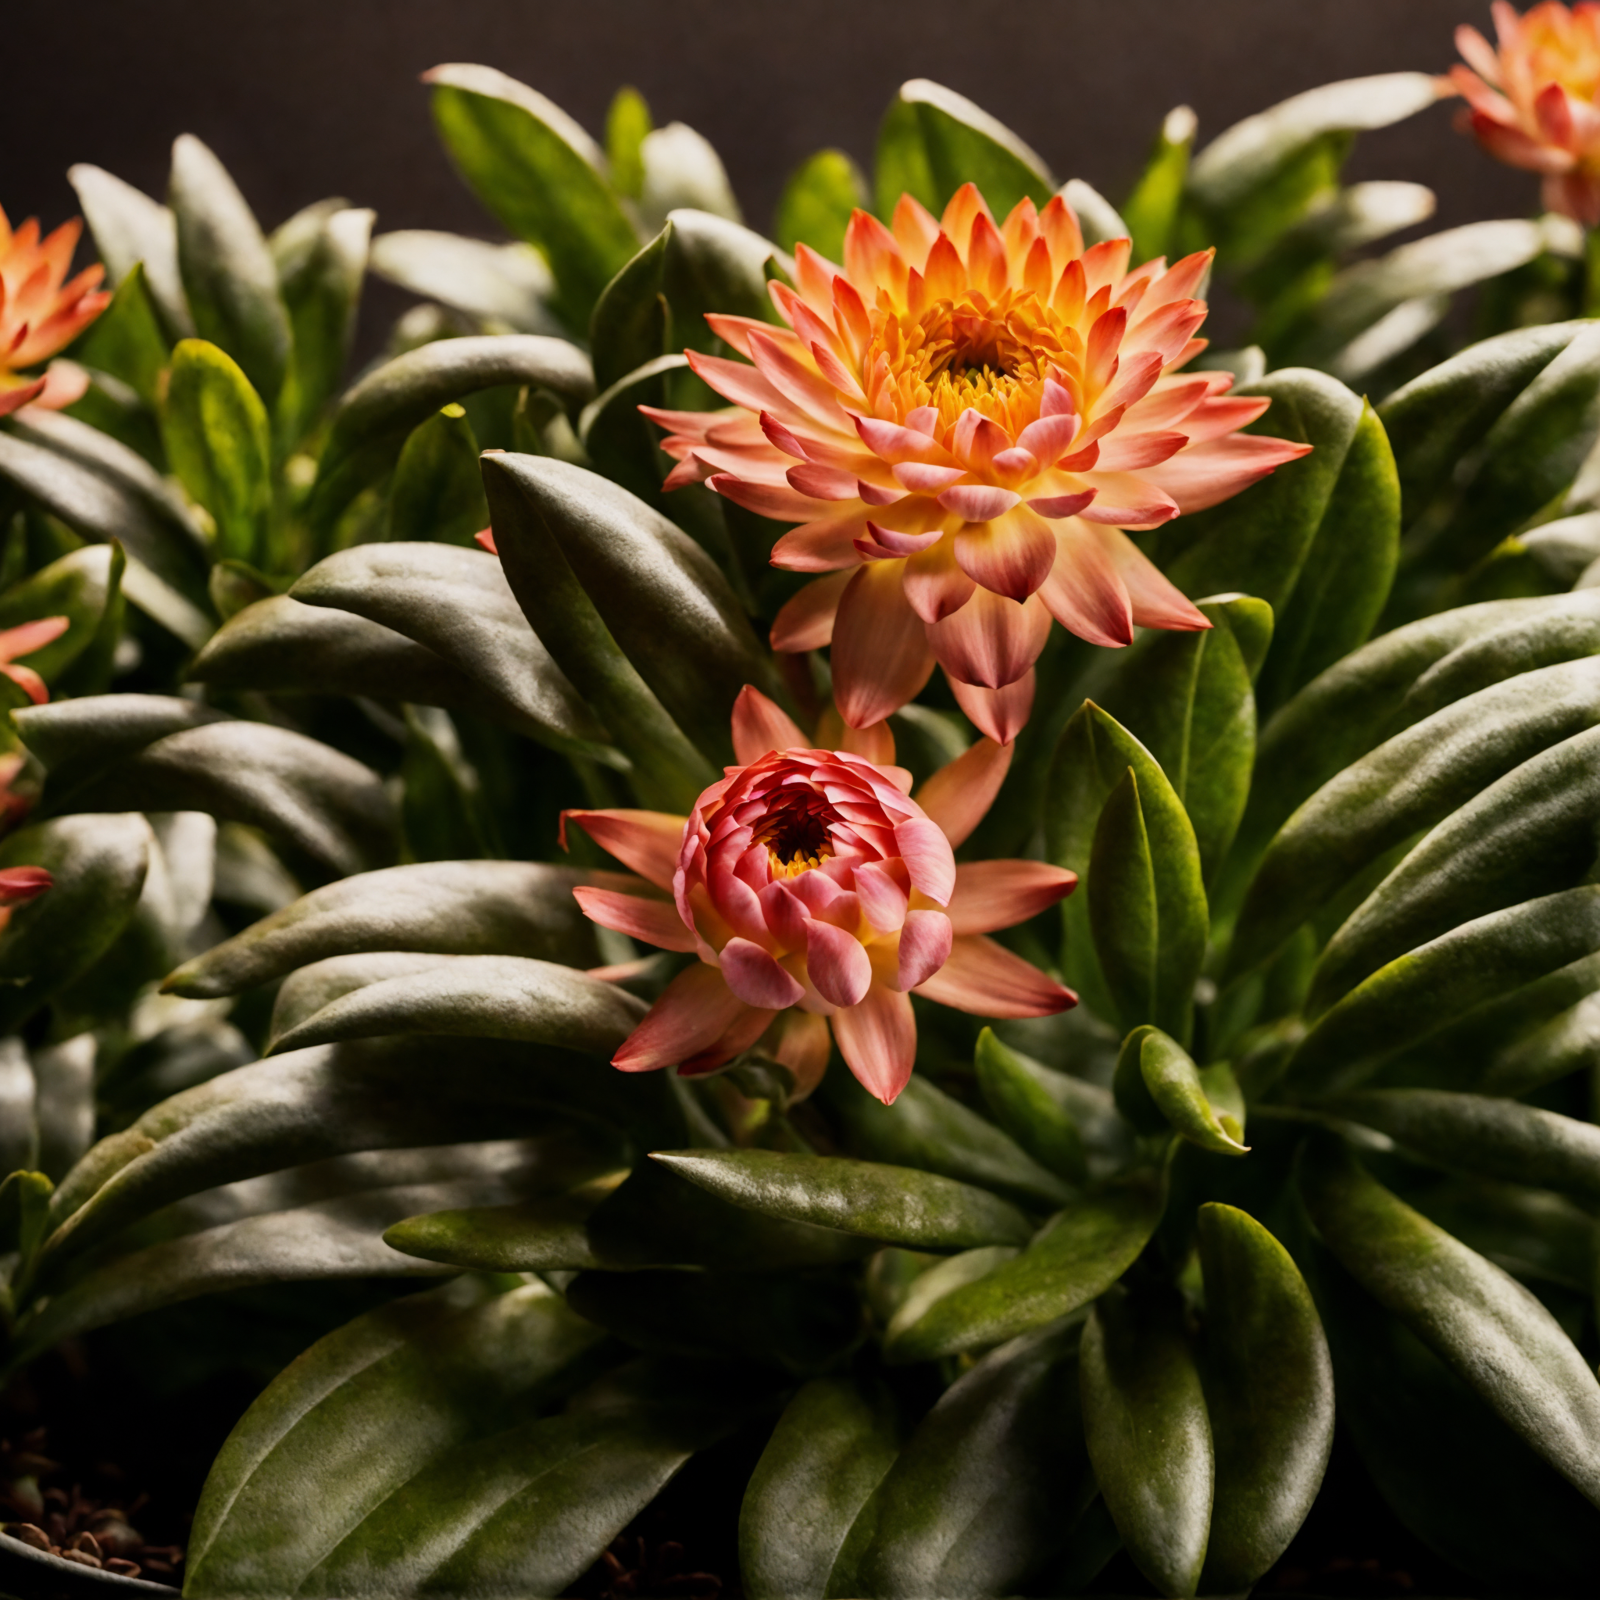 Xerochrysum bracteatum with vibrant pink blooms in a planter, clear lighting, against a dark background.